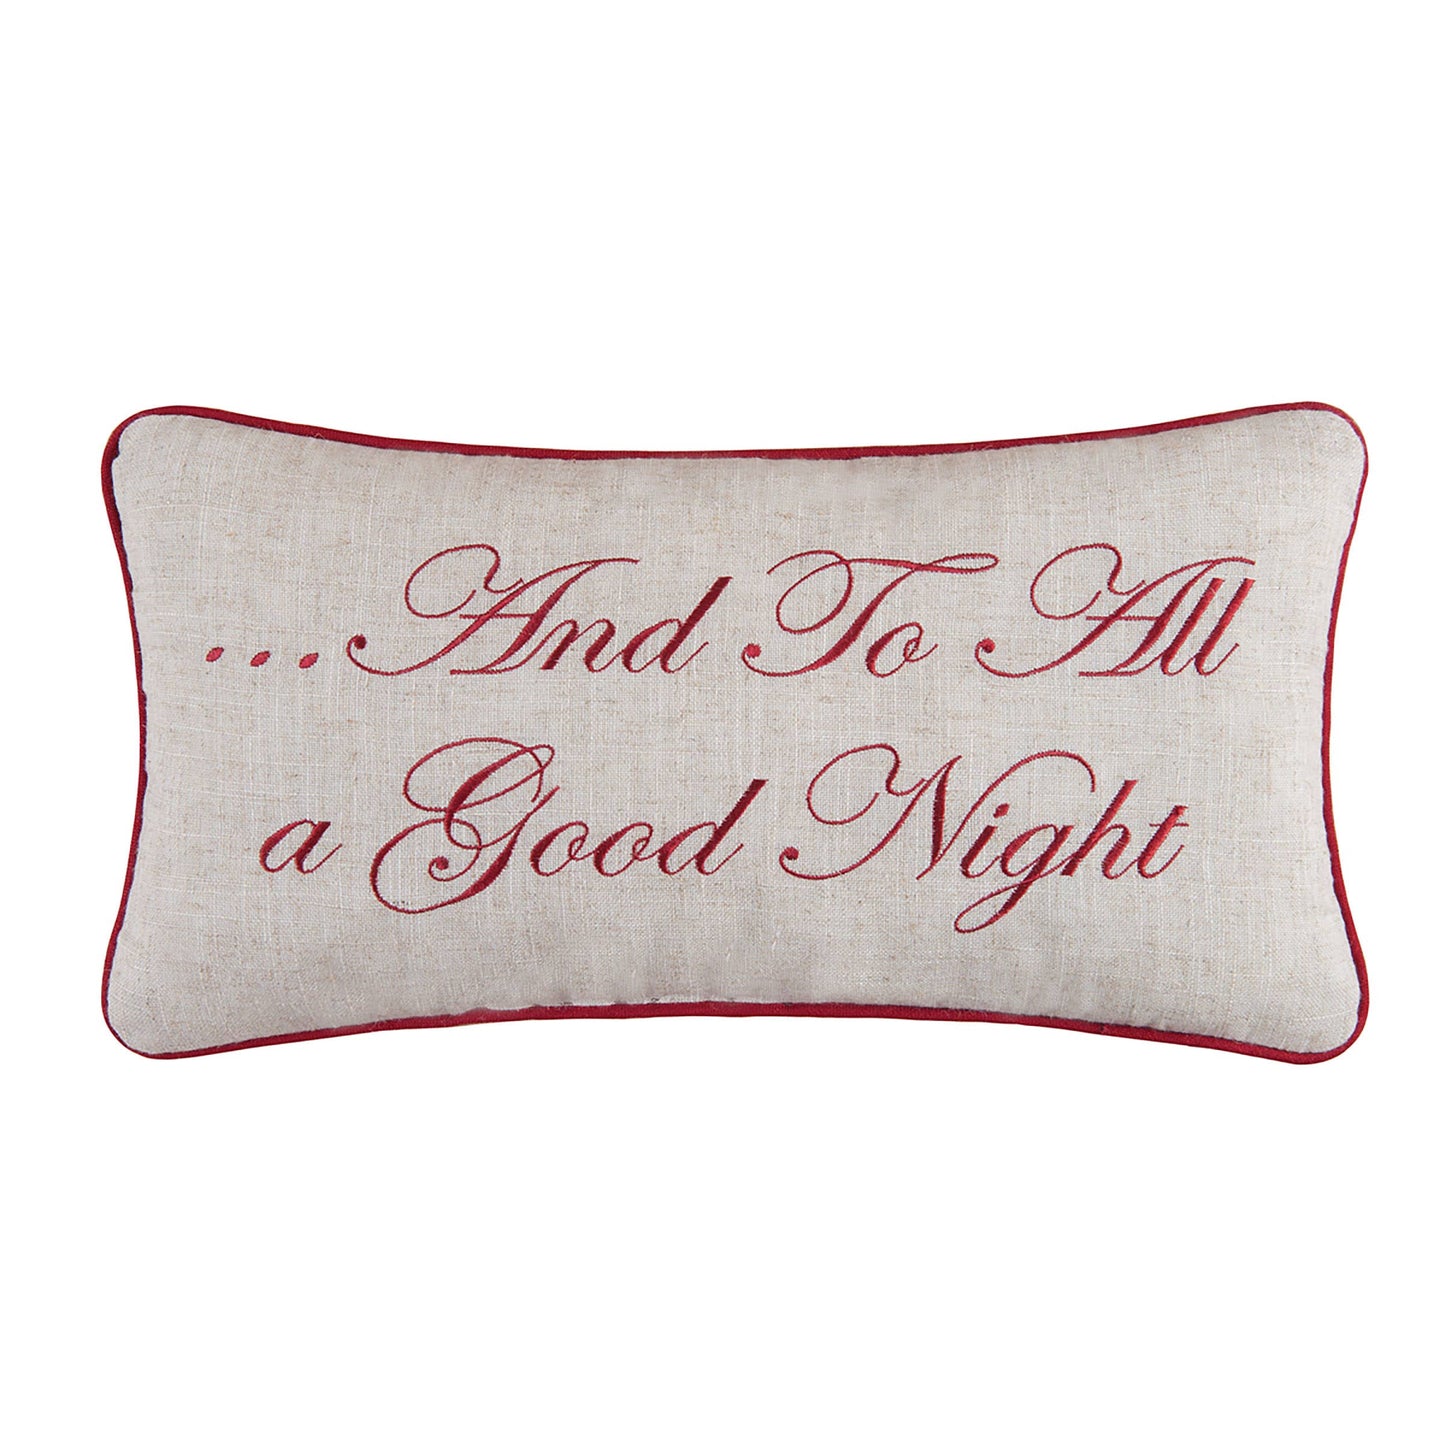 And To All A Good Night Embroidered Pillow